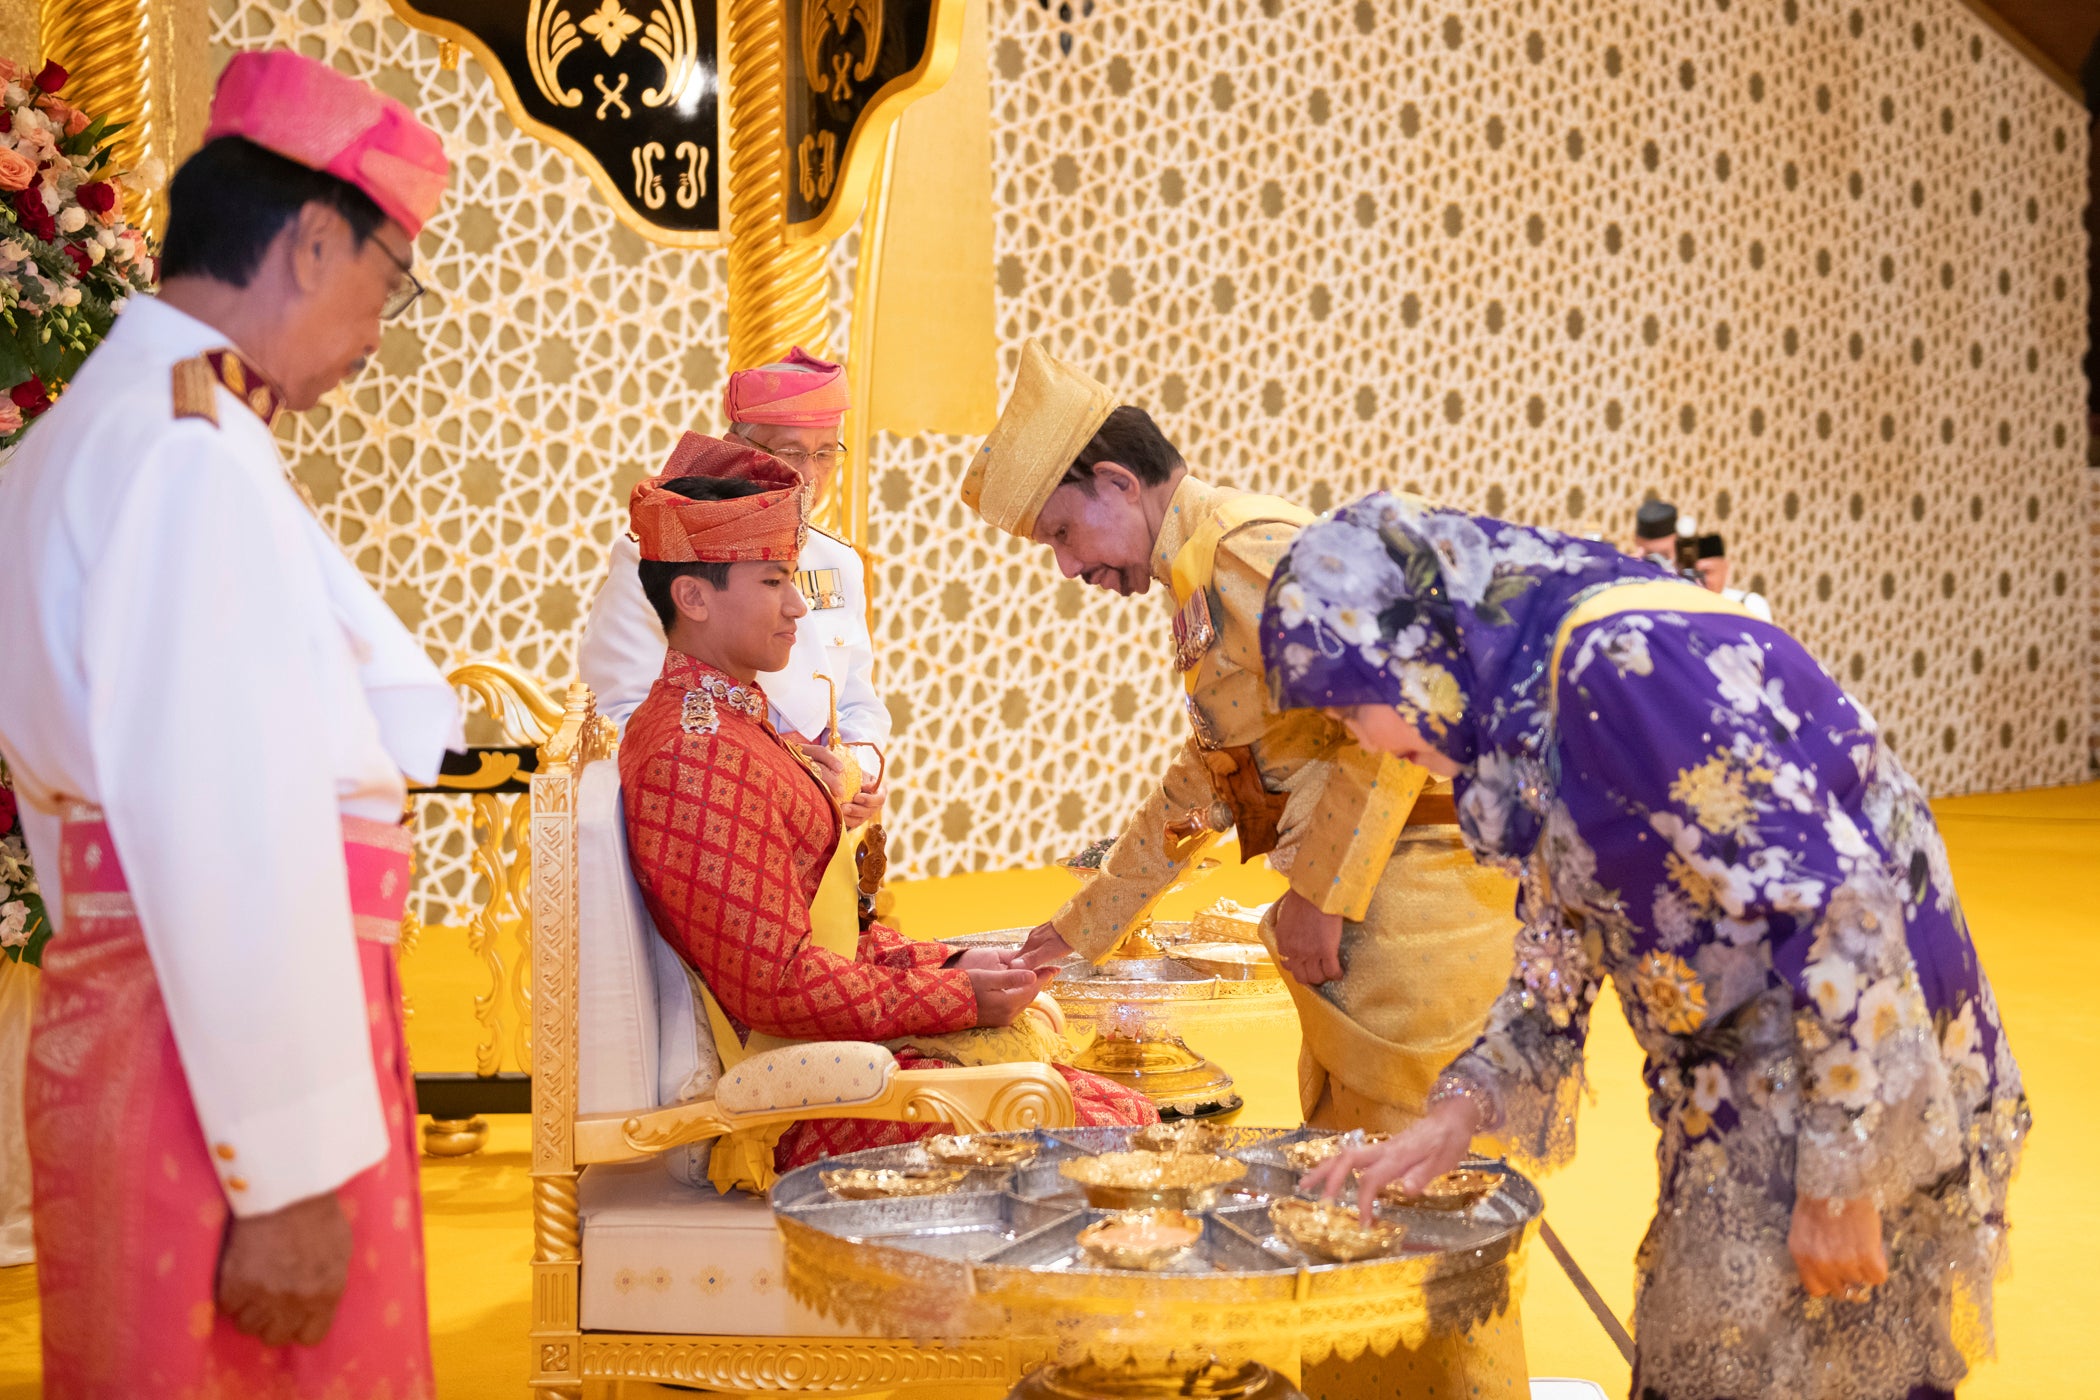 This picture taken by Brunei's Information Department on 10 January 2024 shows Brunei's Sultan Hassanal Bolkiah, centre right, greeting Brunei's Prince Abdul Mateen's, center, during the royal powdering ceremony at Istana Nurul Iman, ahead of his wedding to Anisha Rosnah, in Bandar Seri Begawan, Brunei